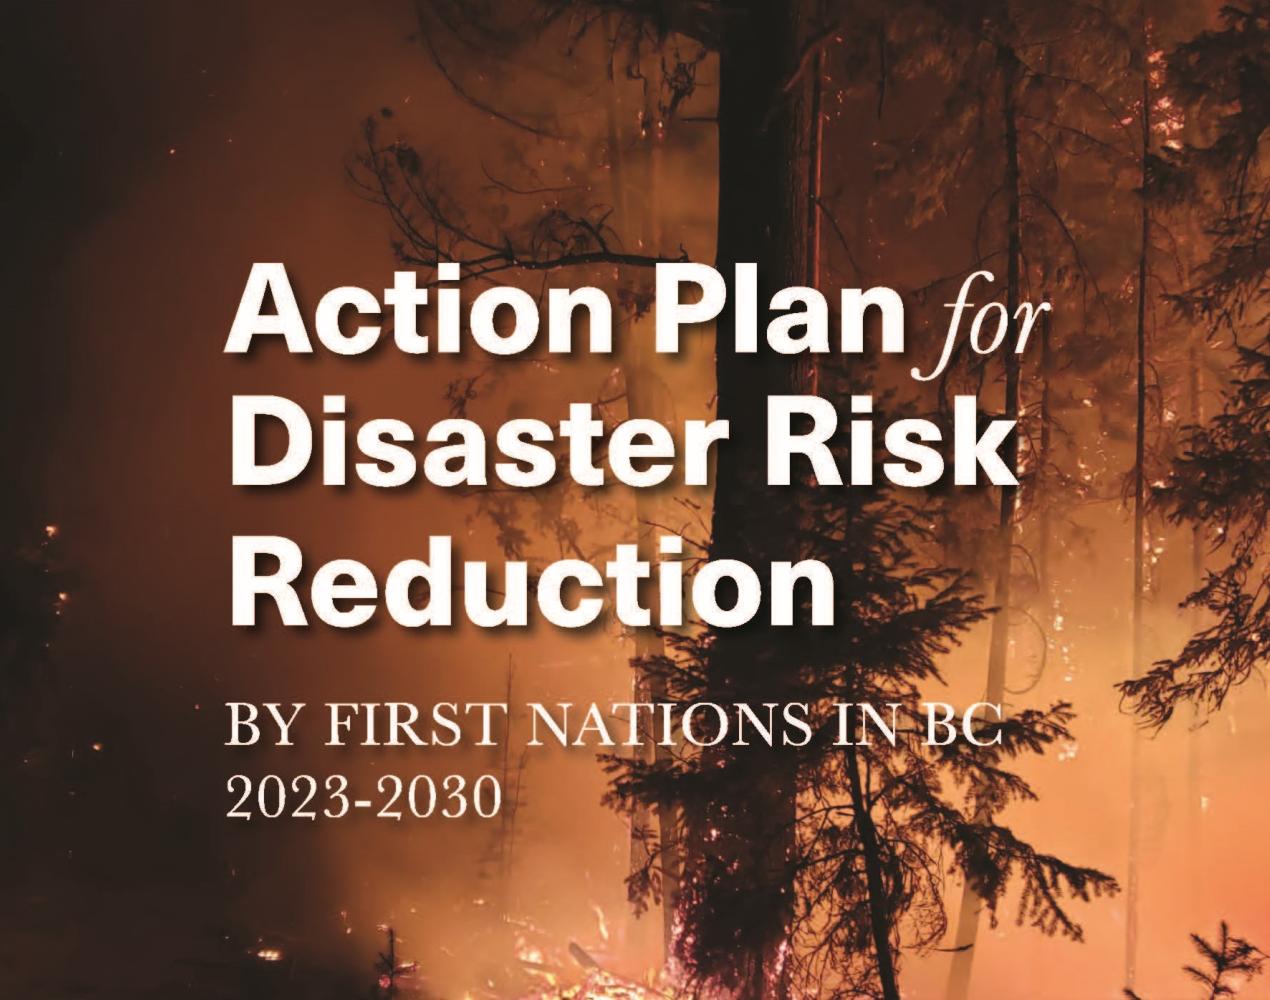 Action Plan for Disaster Risk Reduction by First Nations in BC 2023-2030 with image of burning forest in background